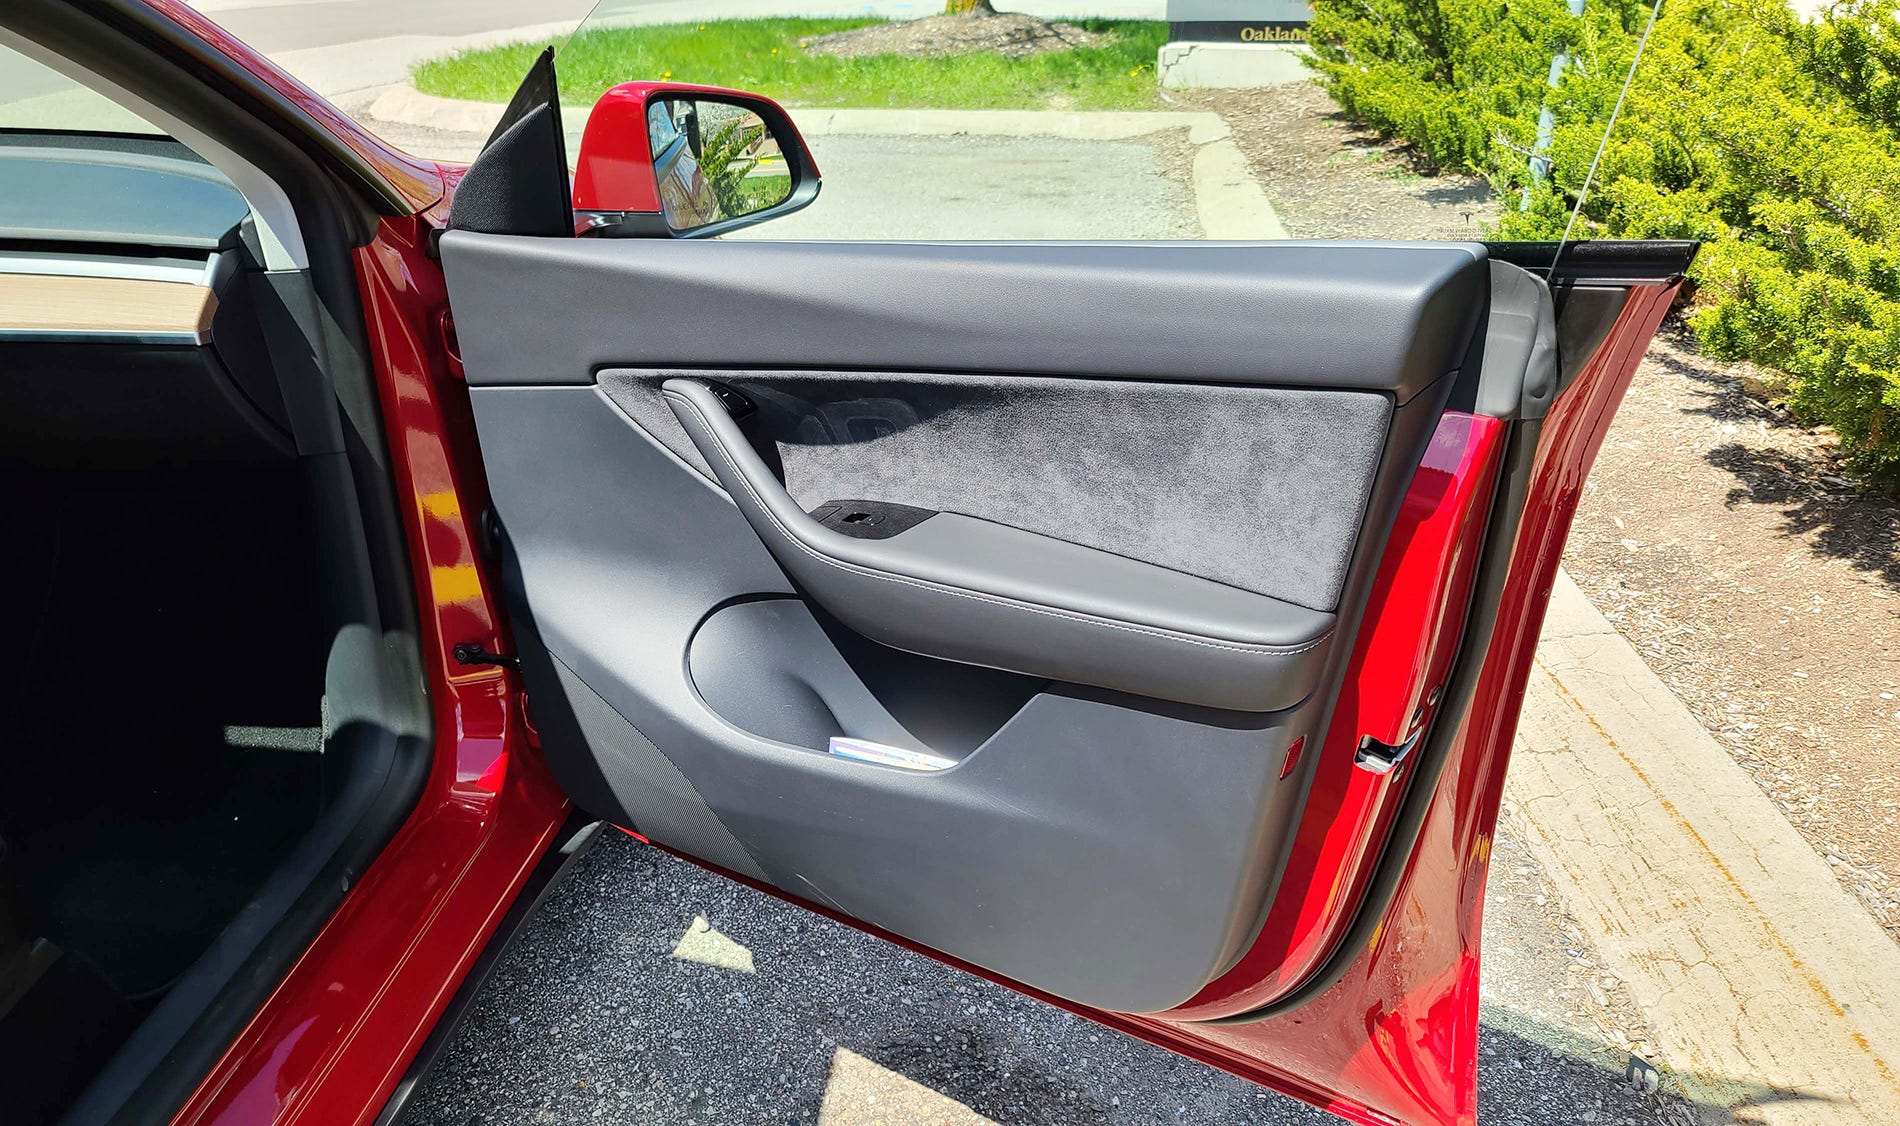 The Model Y sits 6.6 inches off the ground, making for easy cabin entry.